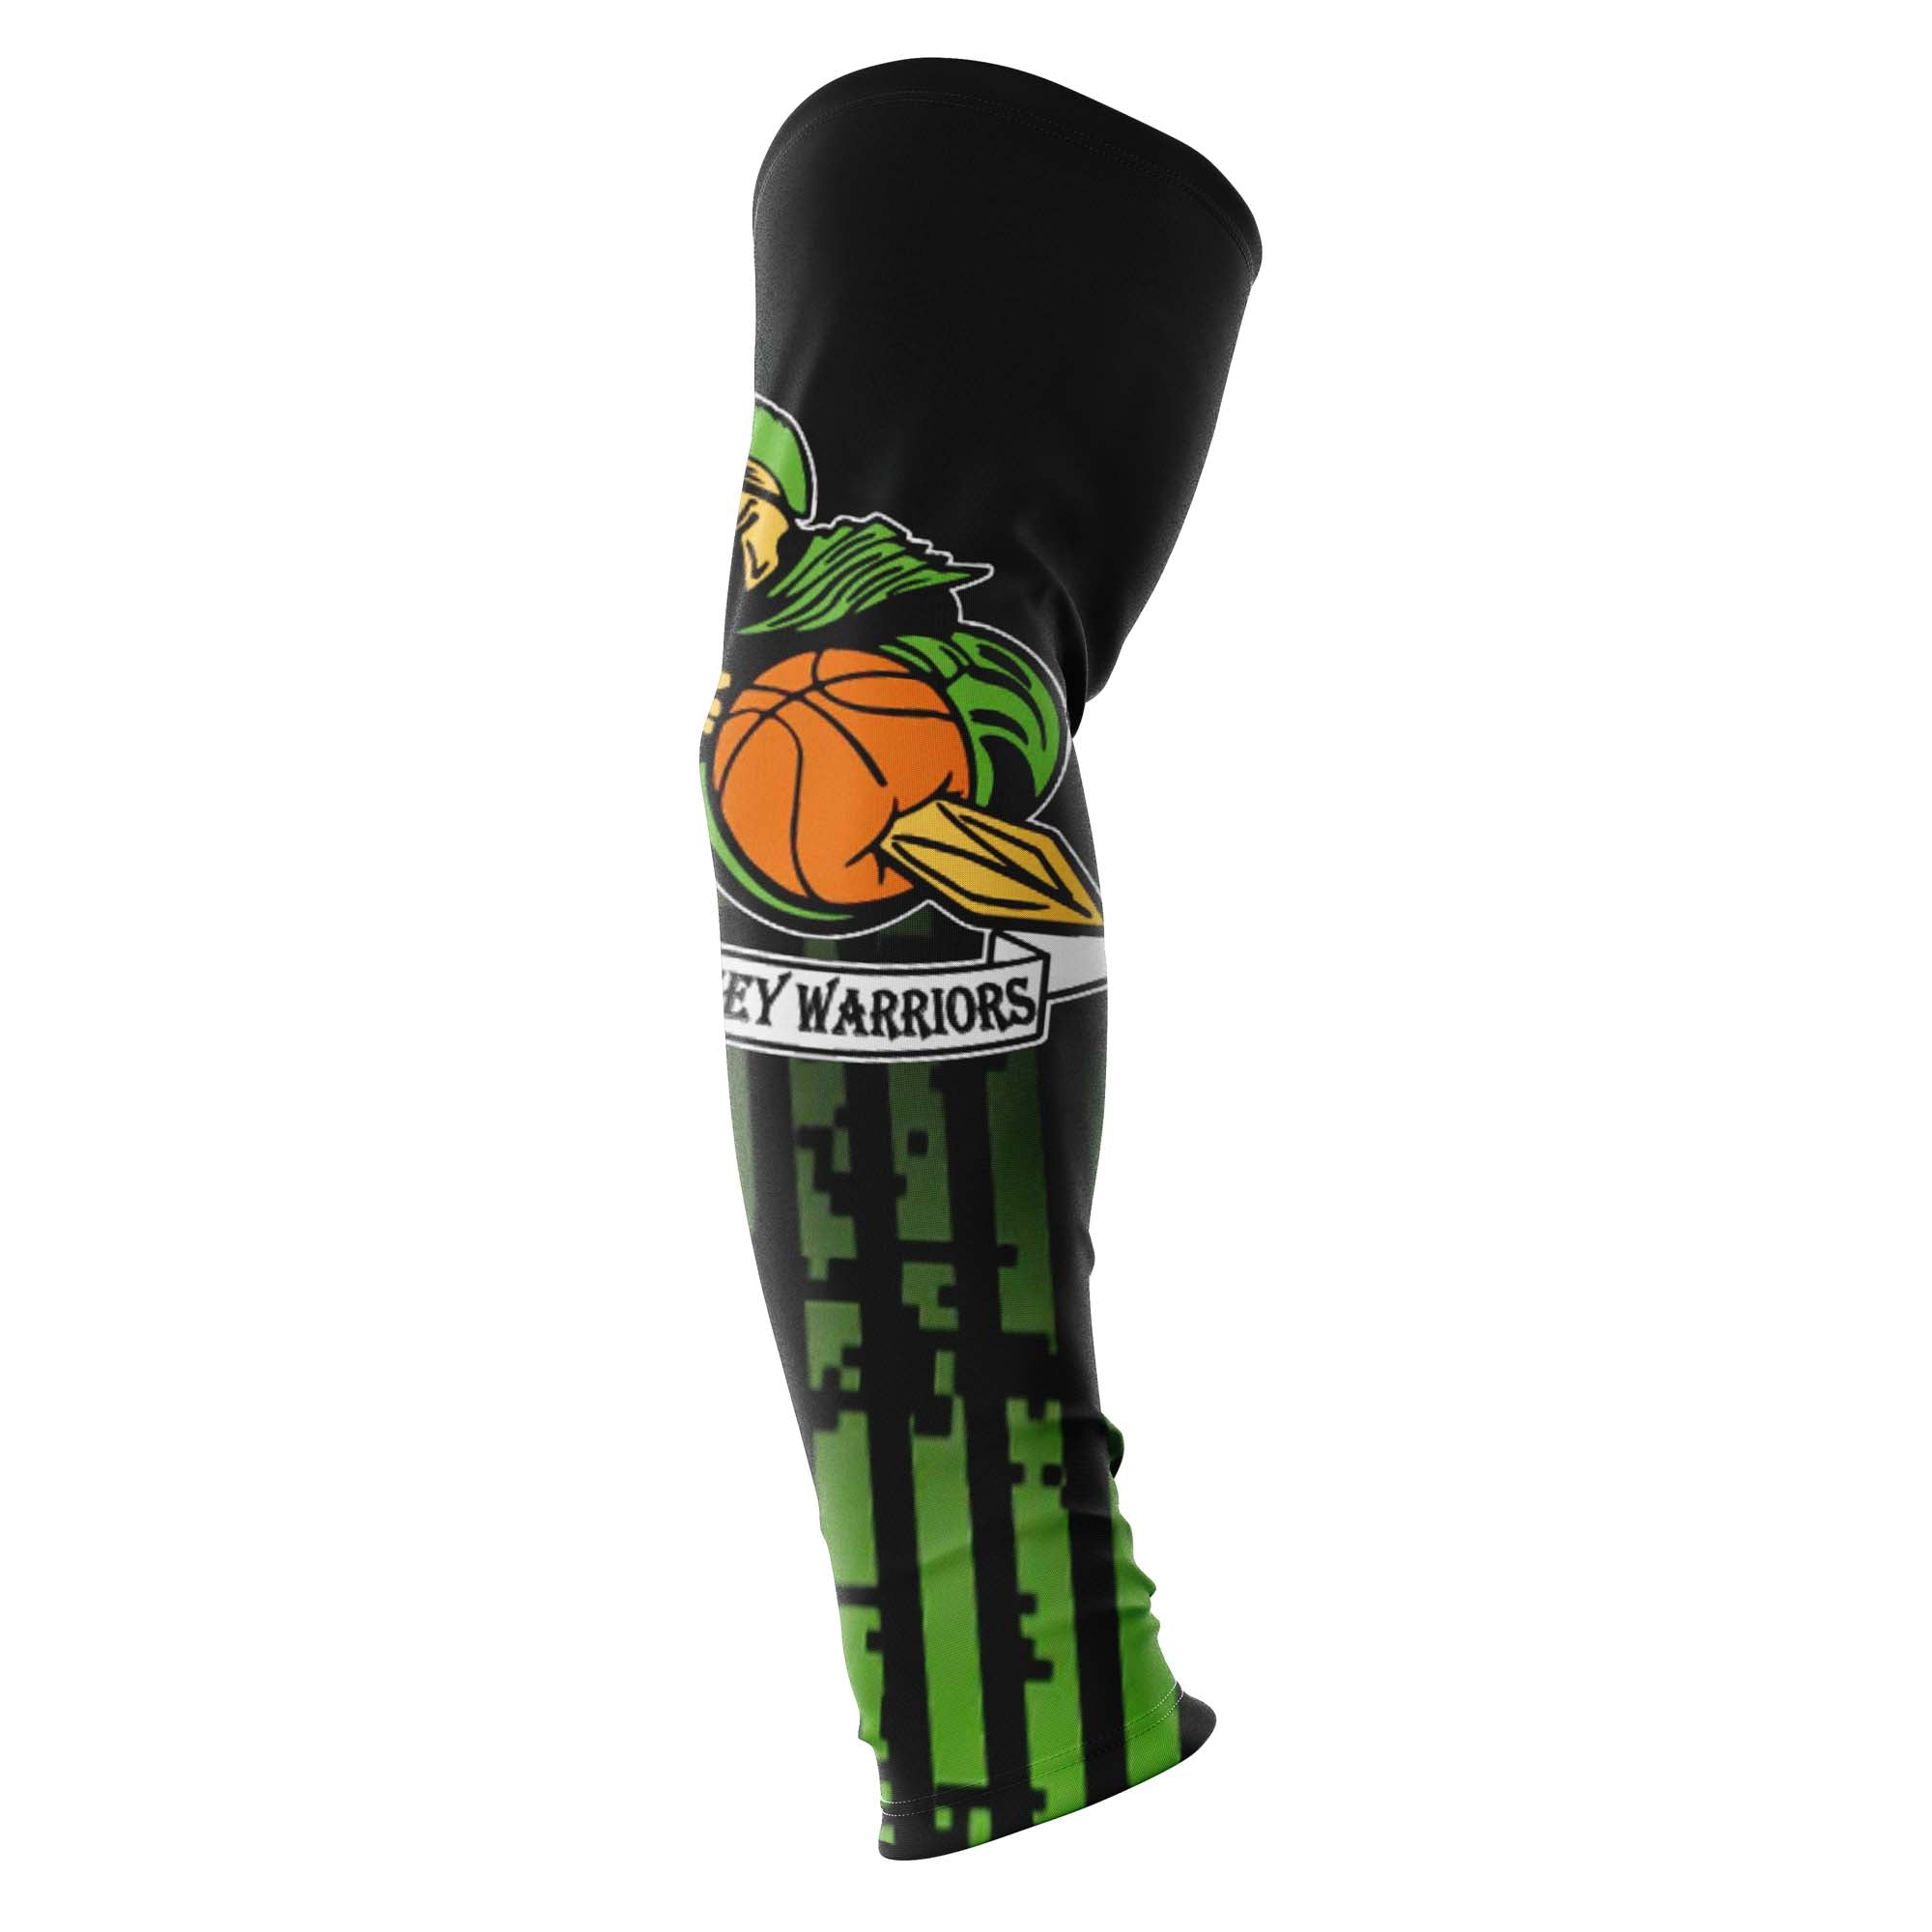 JERSEY WARRIORS Basketball Sublimated Arm Sleeve